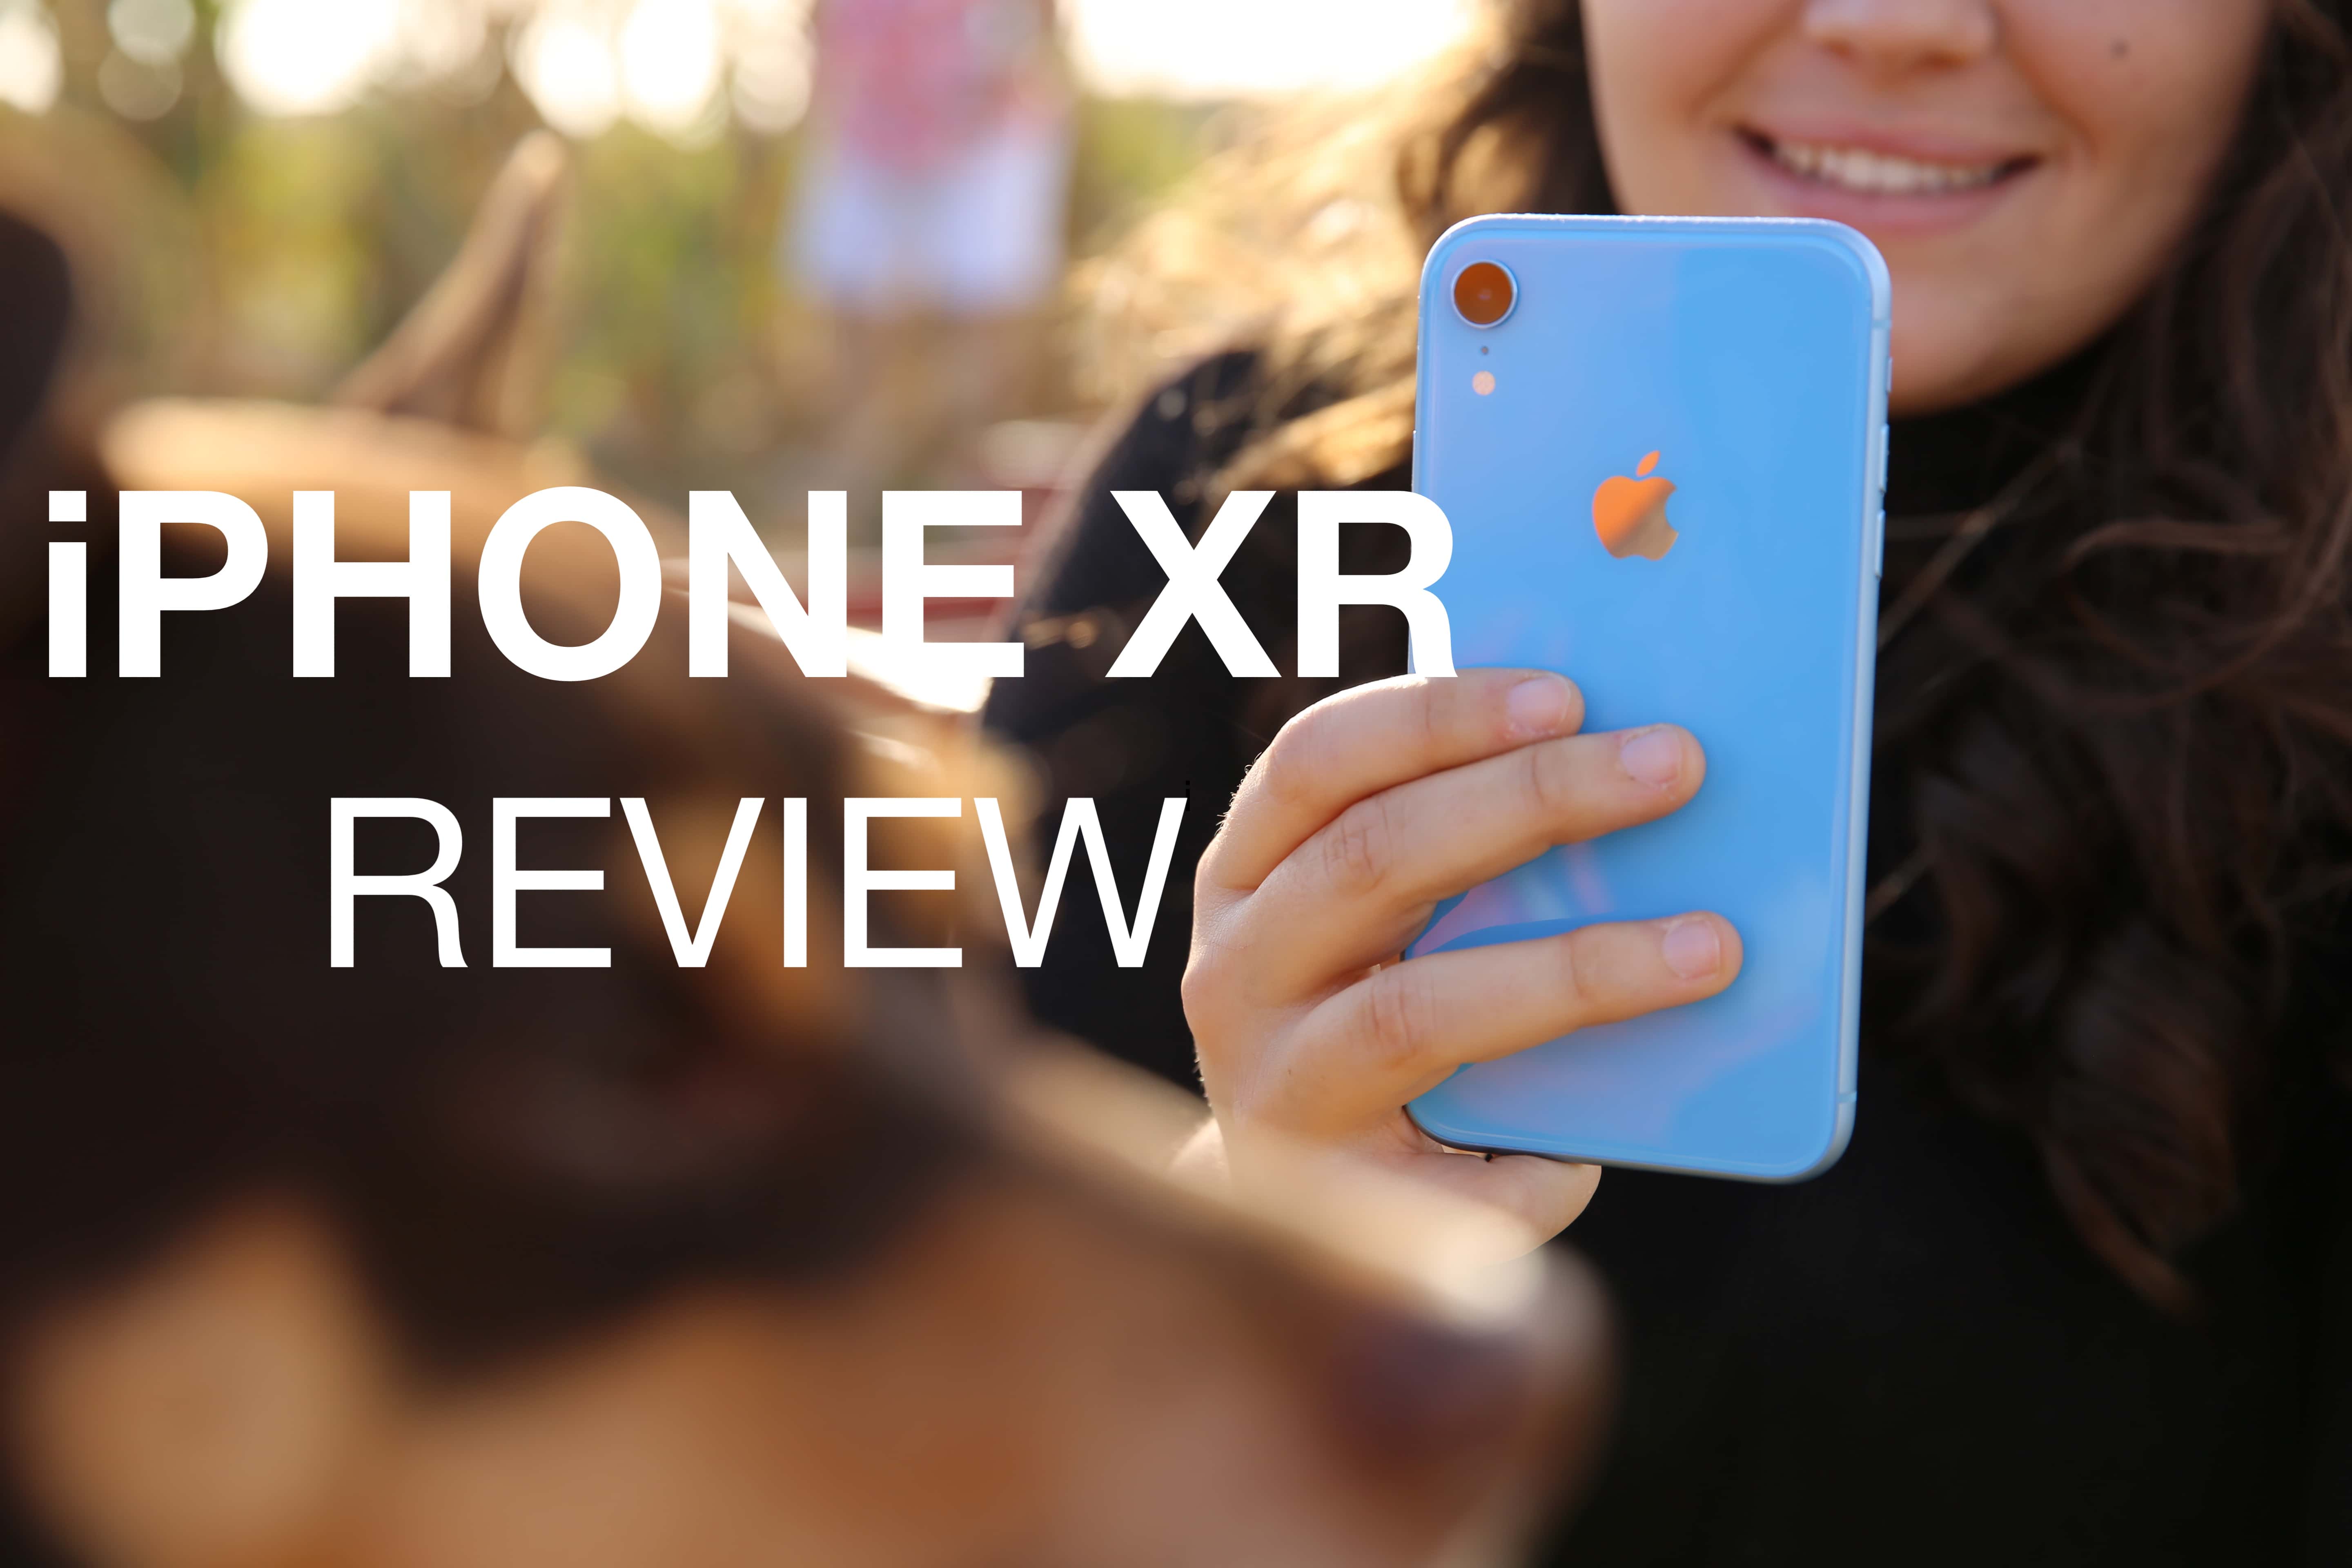 iPhone XR review: With a great screen, cameras, battery life and Face ID, the iPhone XR is a nifty smartphone.